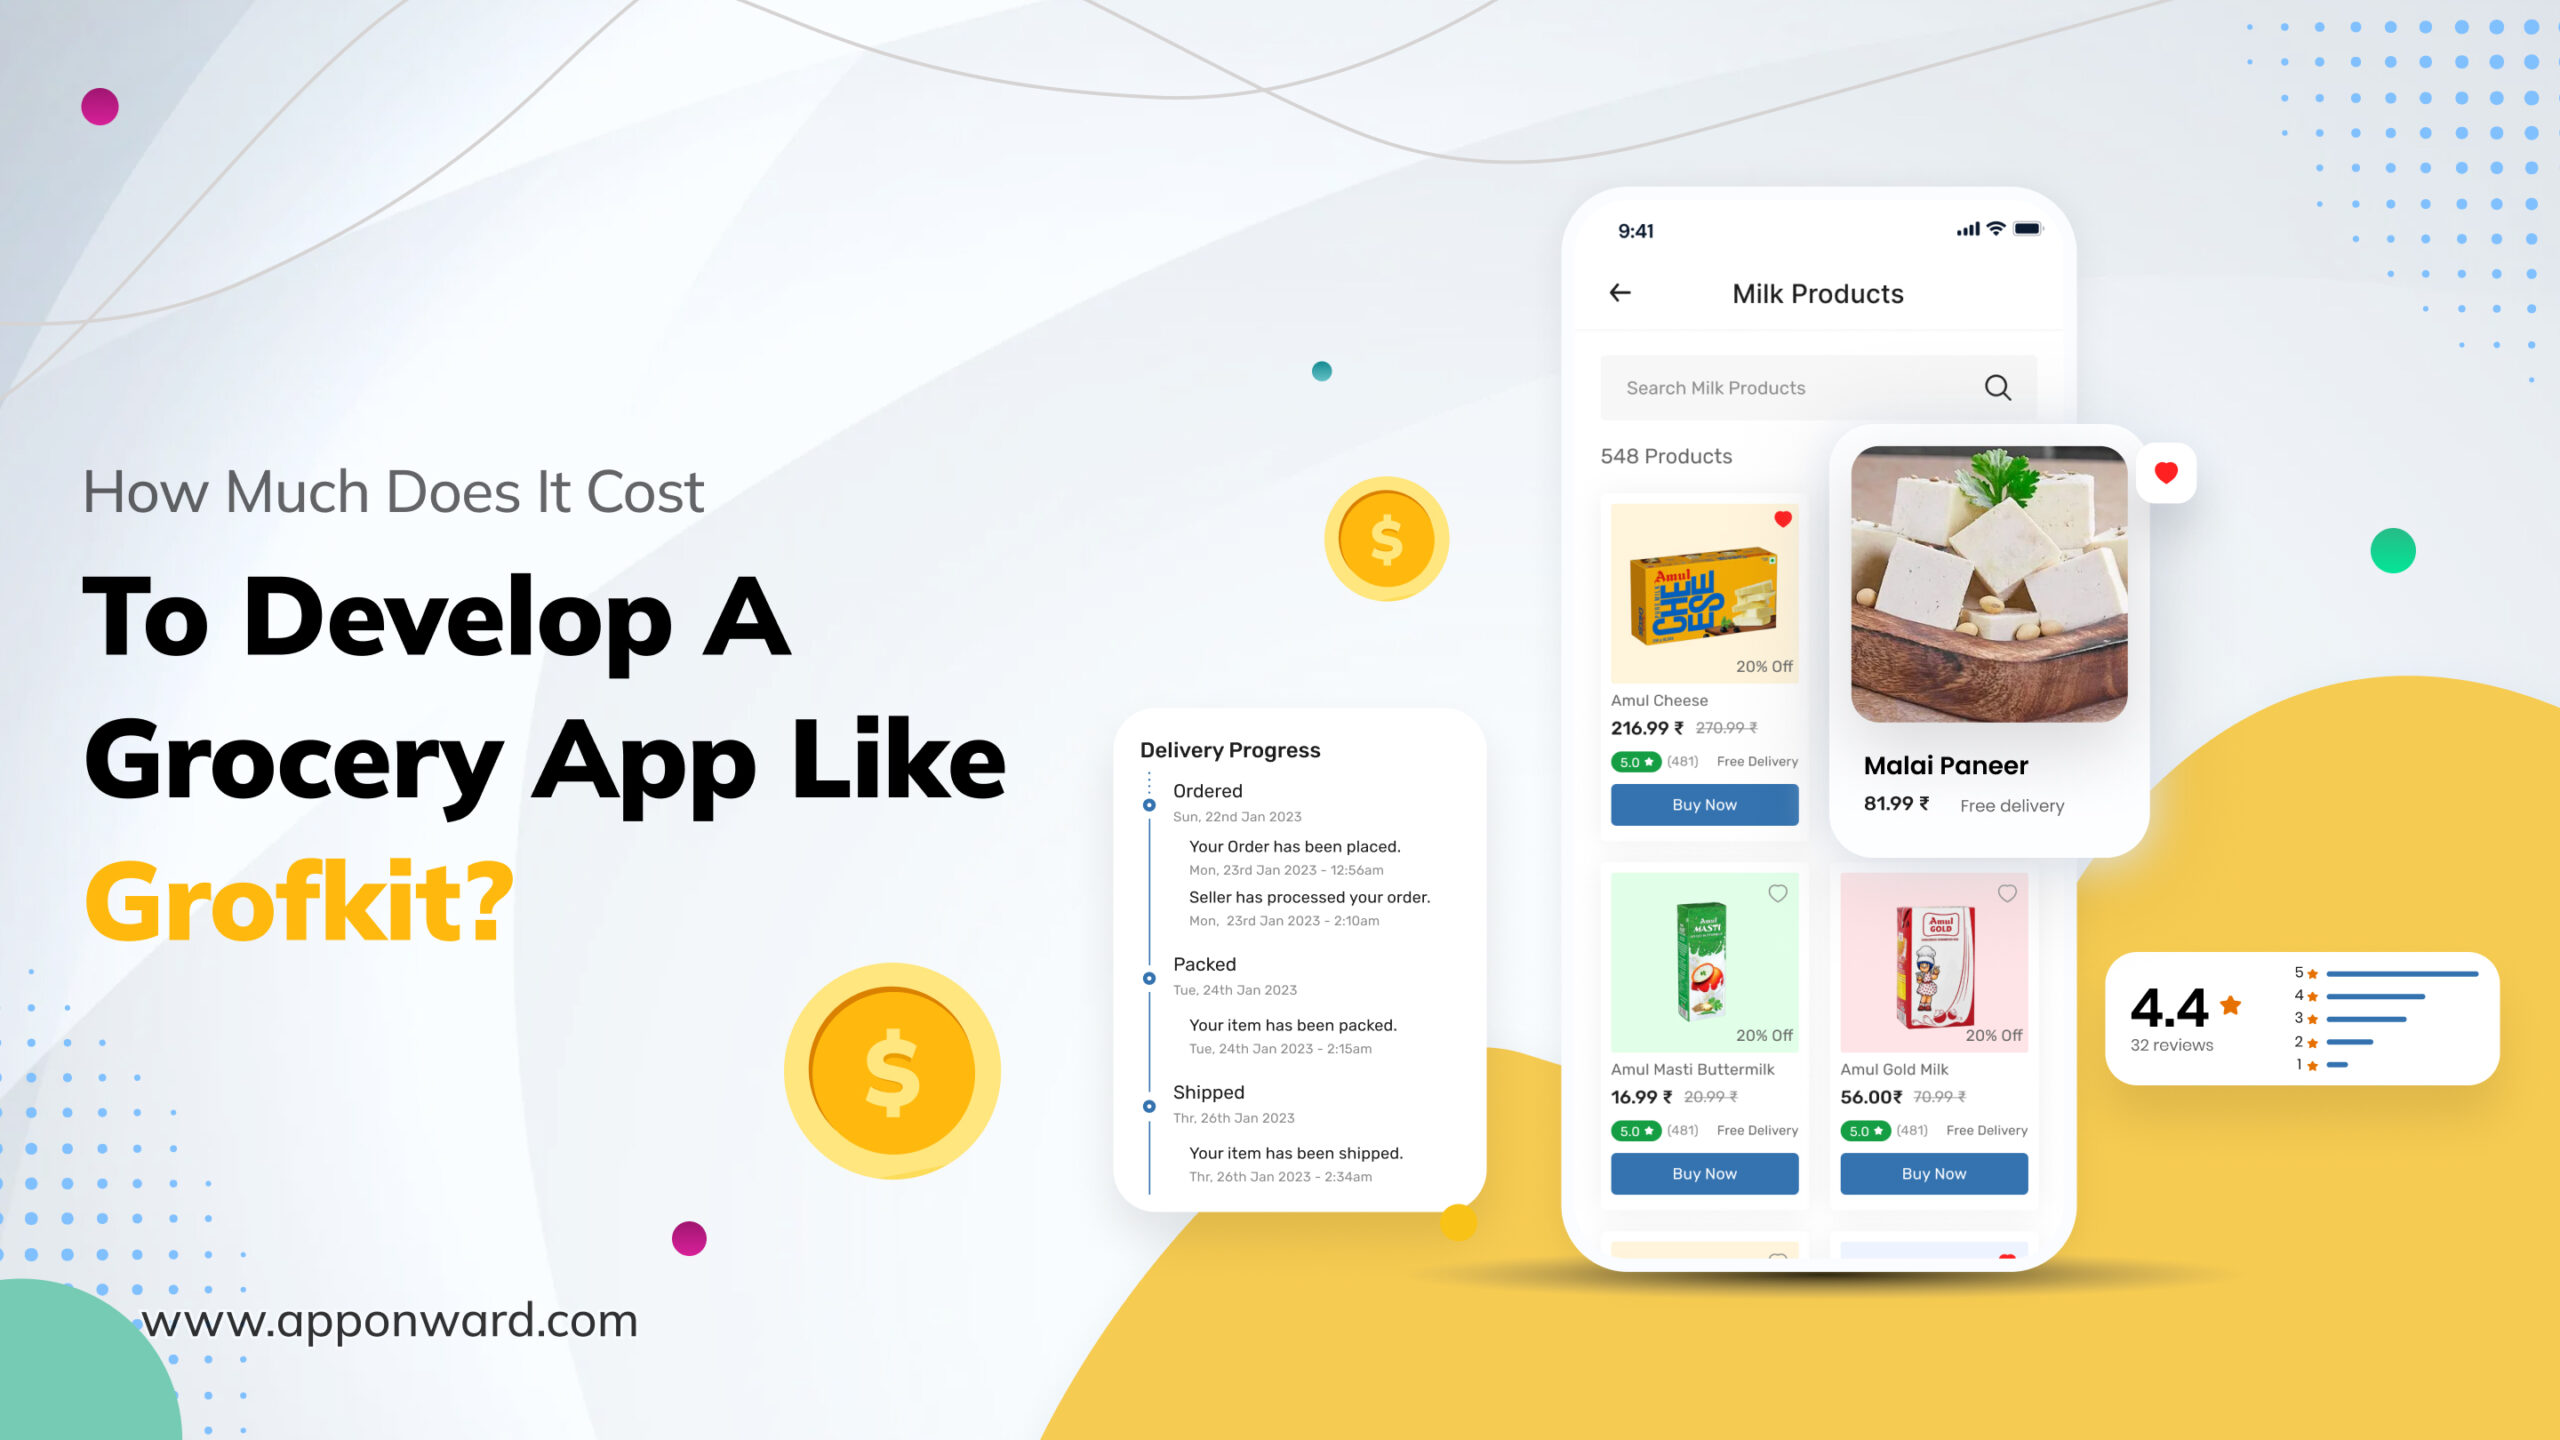 How Much Does It Cost To Develop A Grocery App Like Grofkit?